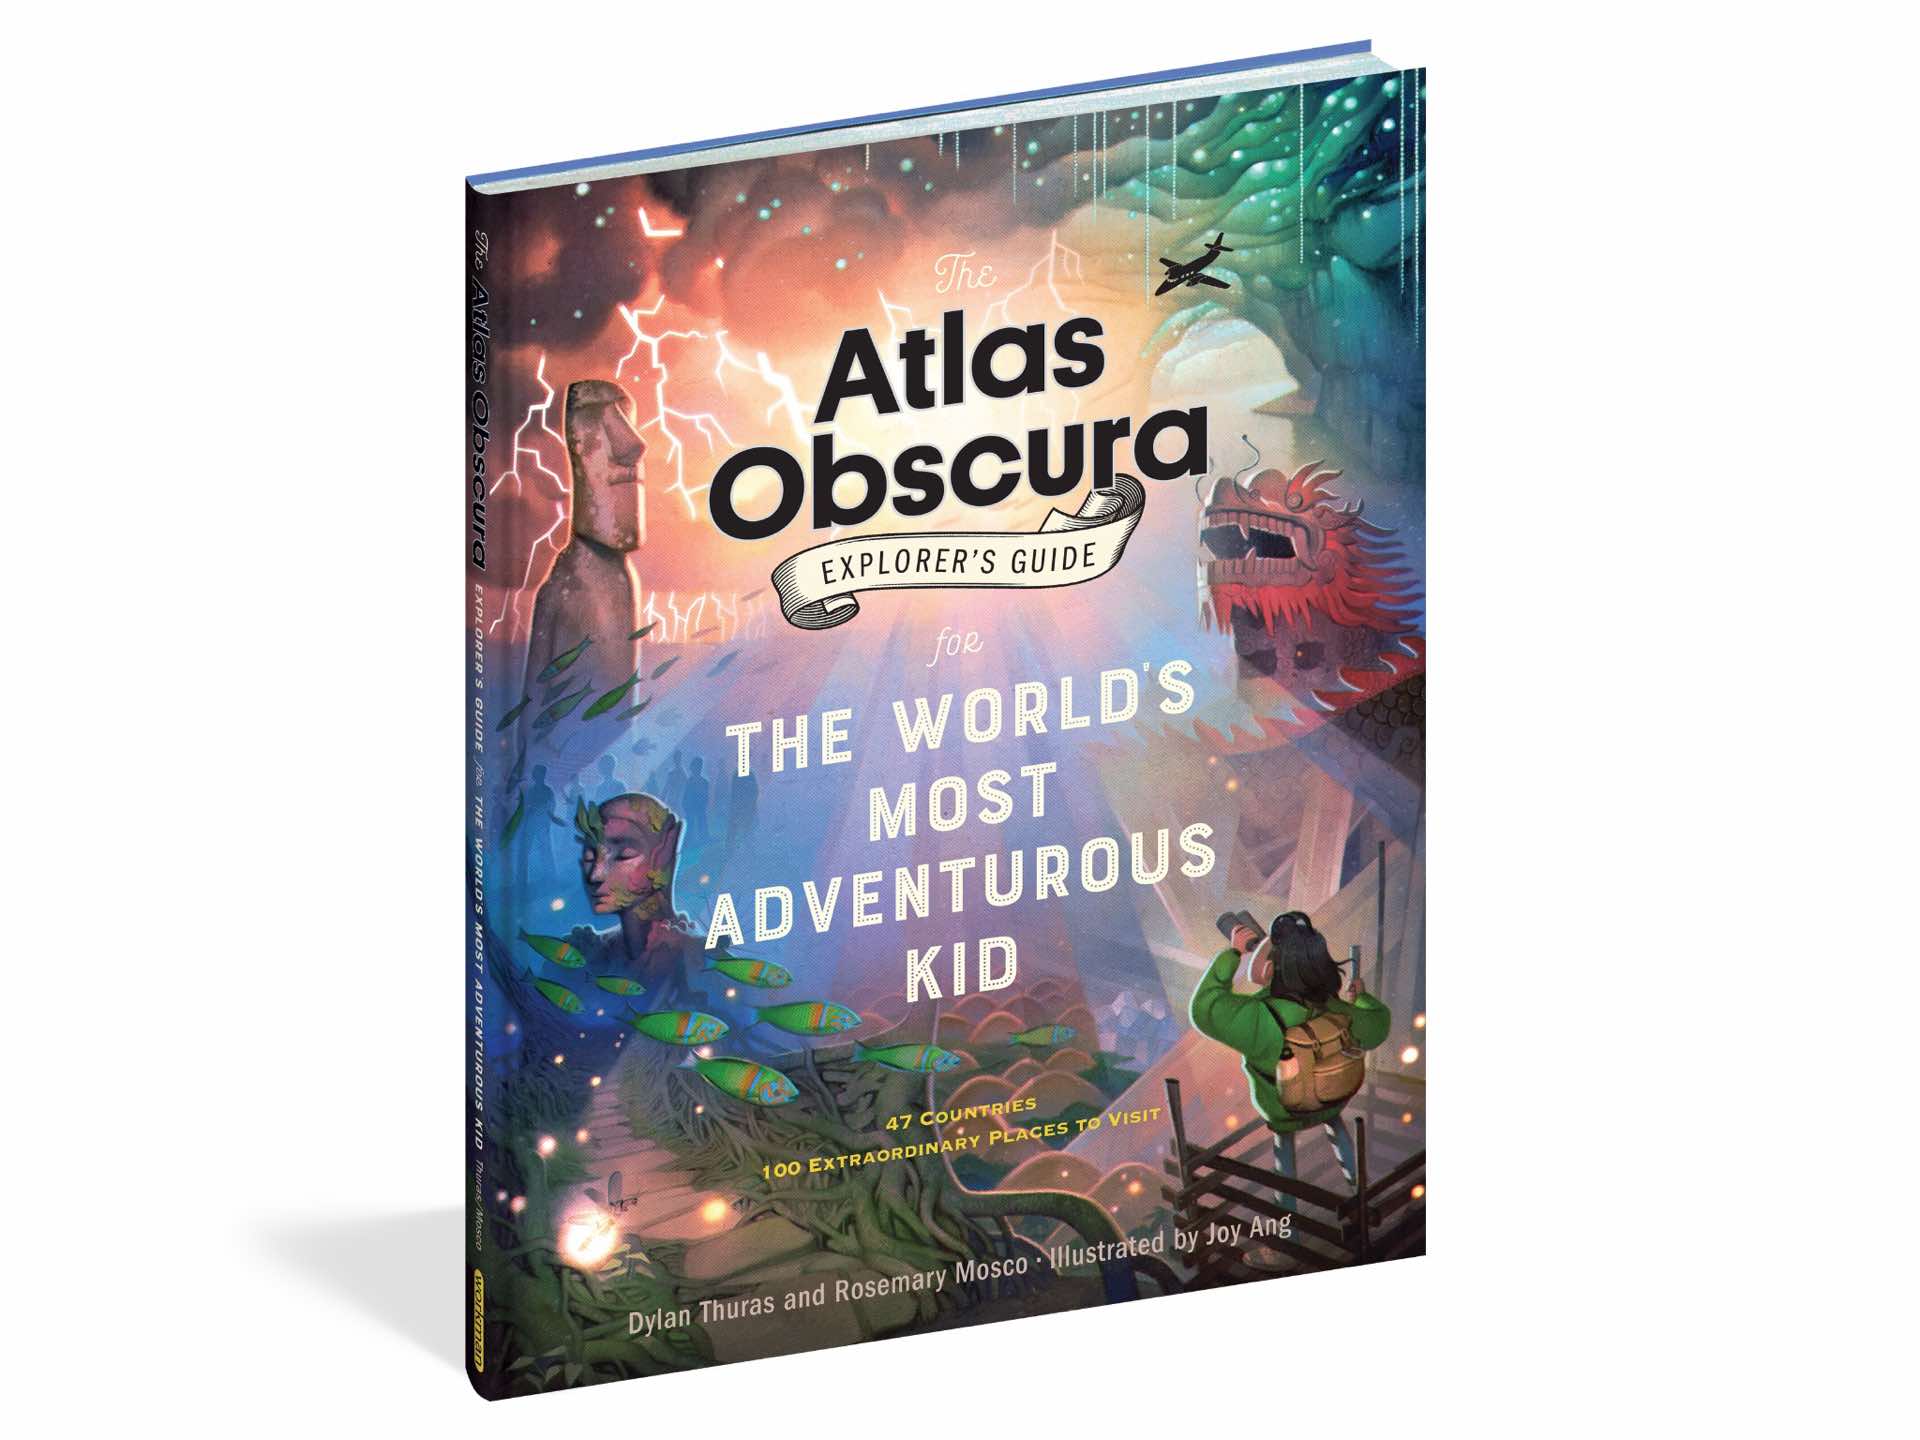 Atlas Obscura's Explorer’s Guide for the World’s Most Adventurous Kid. ($14 hardcover)